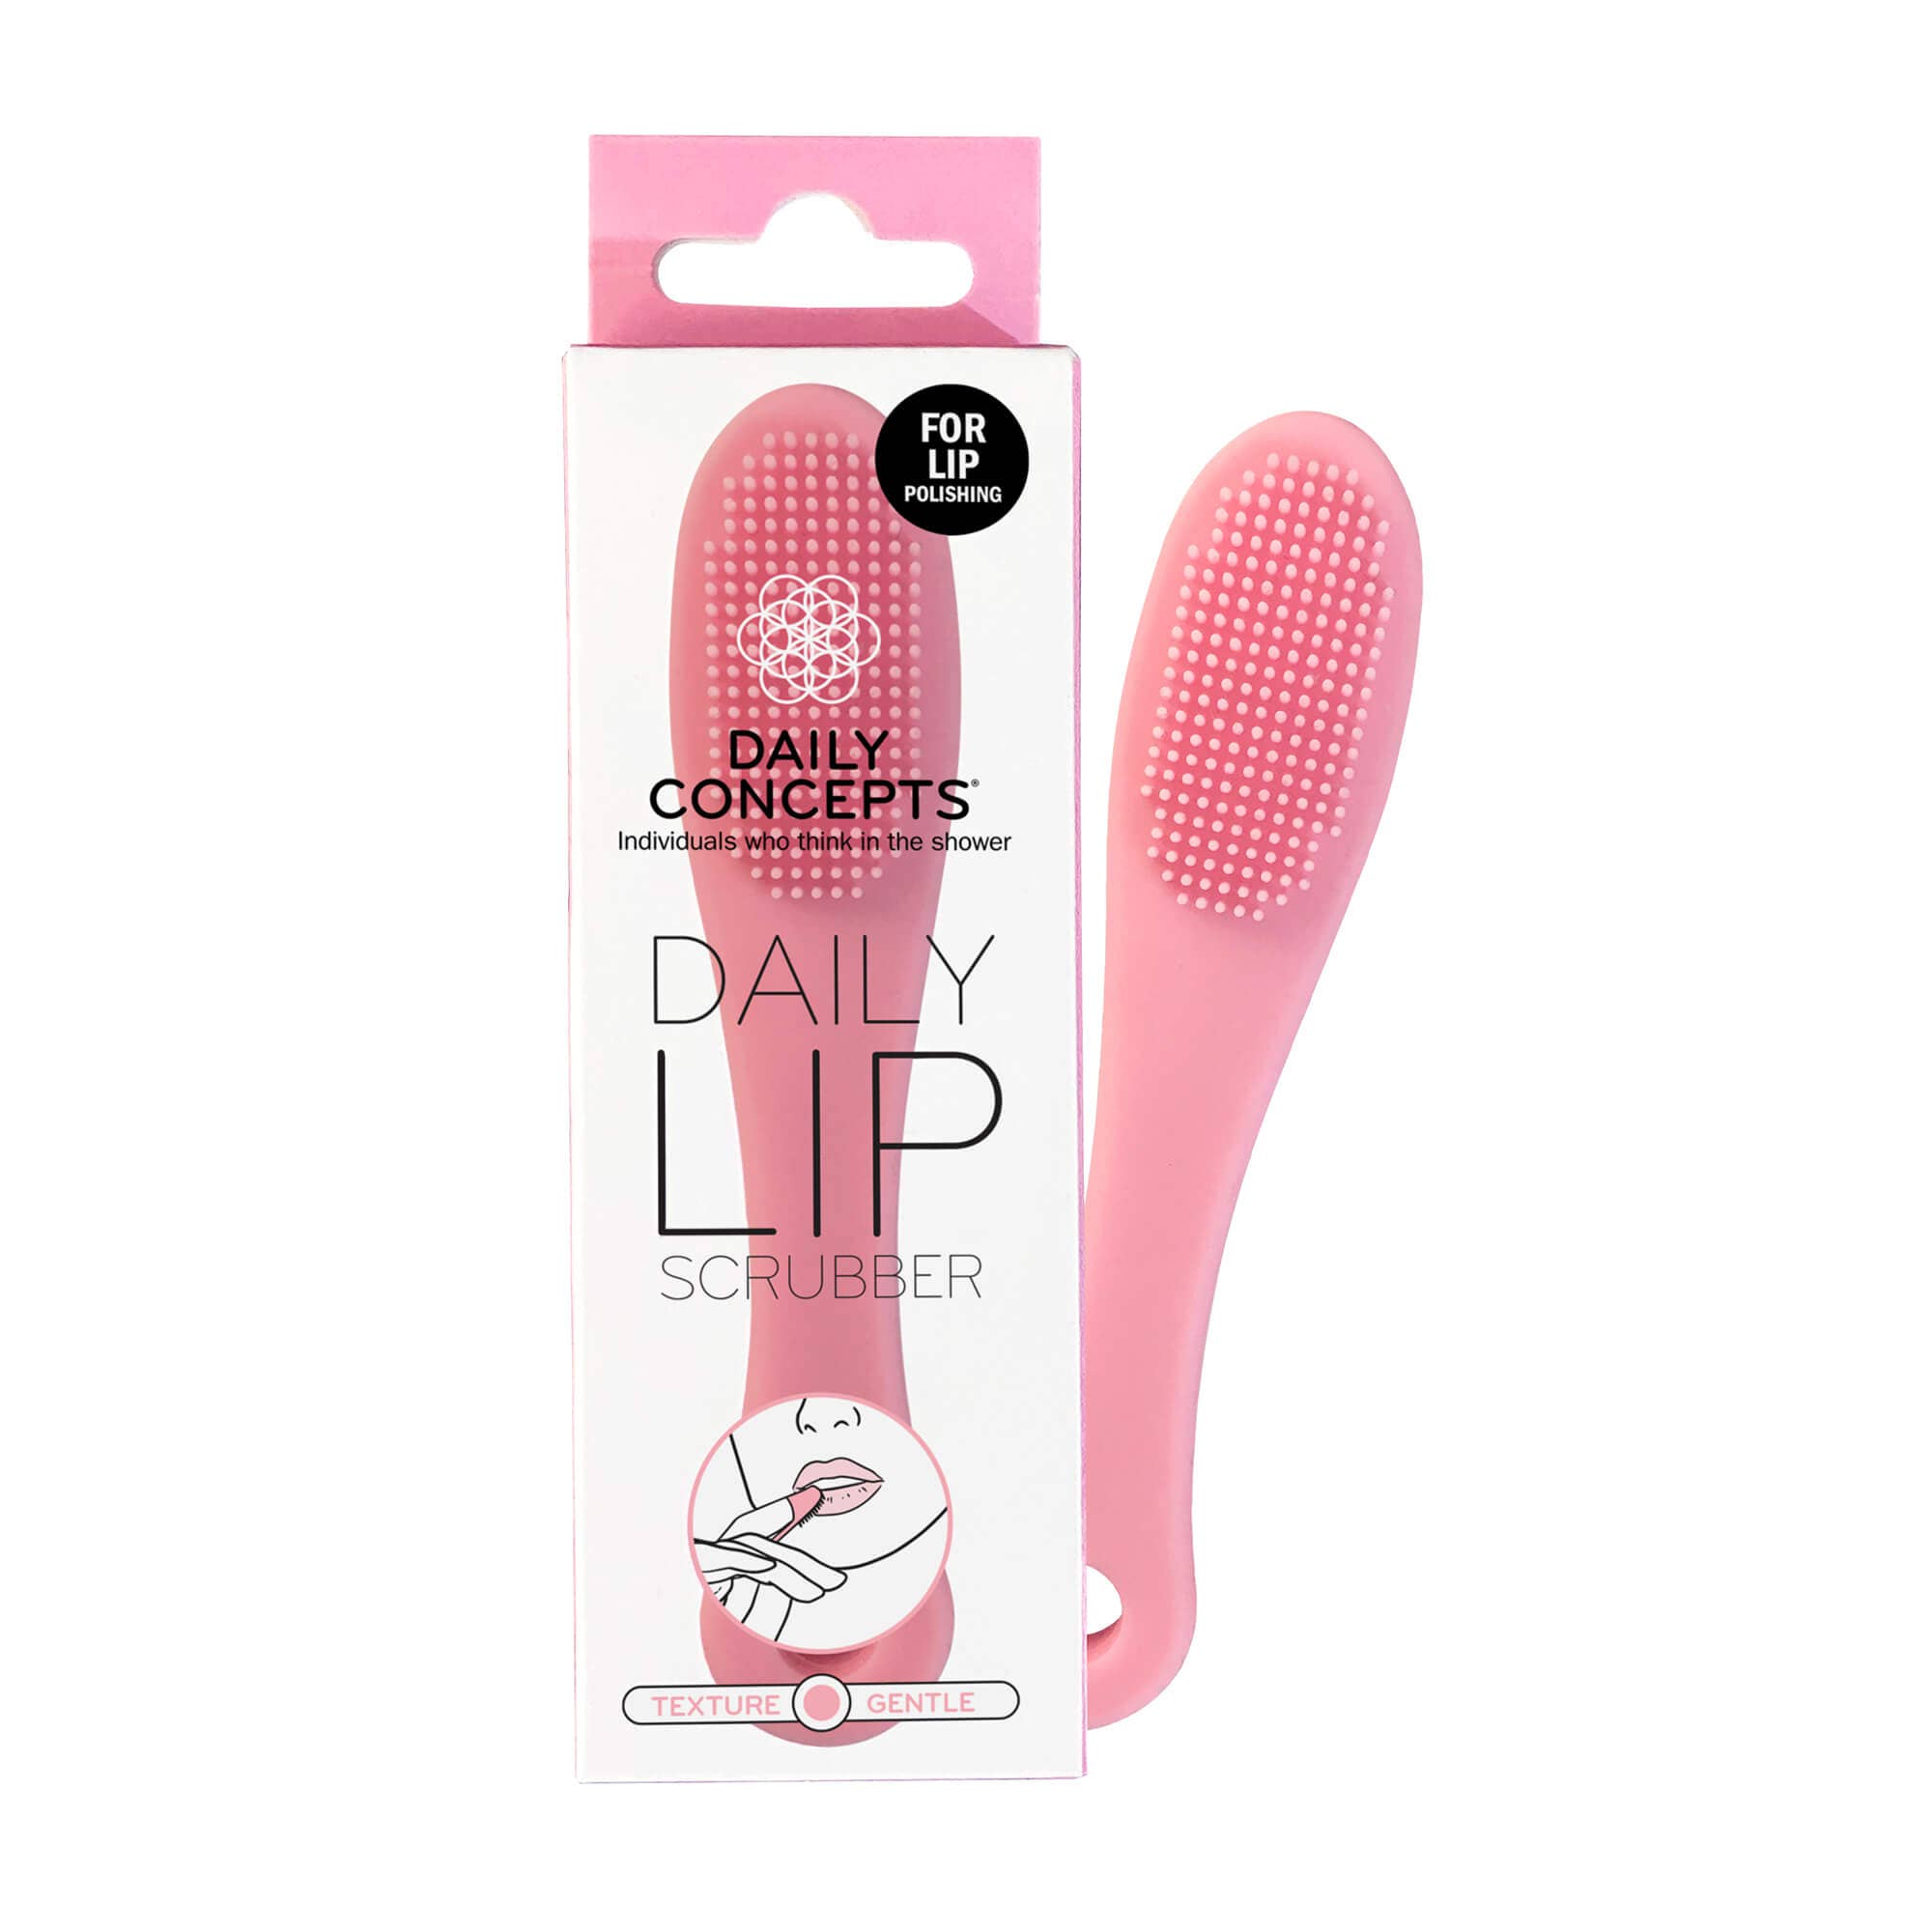 Daily Concepts Gentle Lip Scrubber